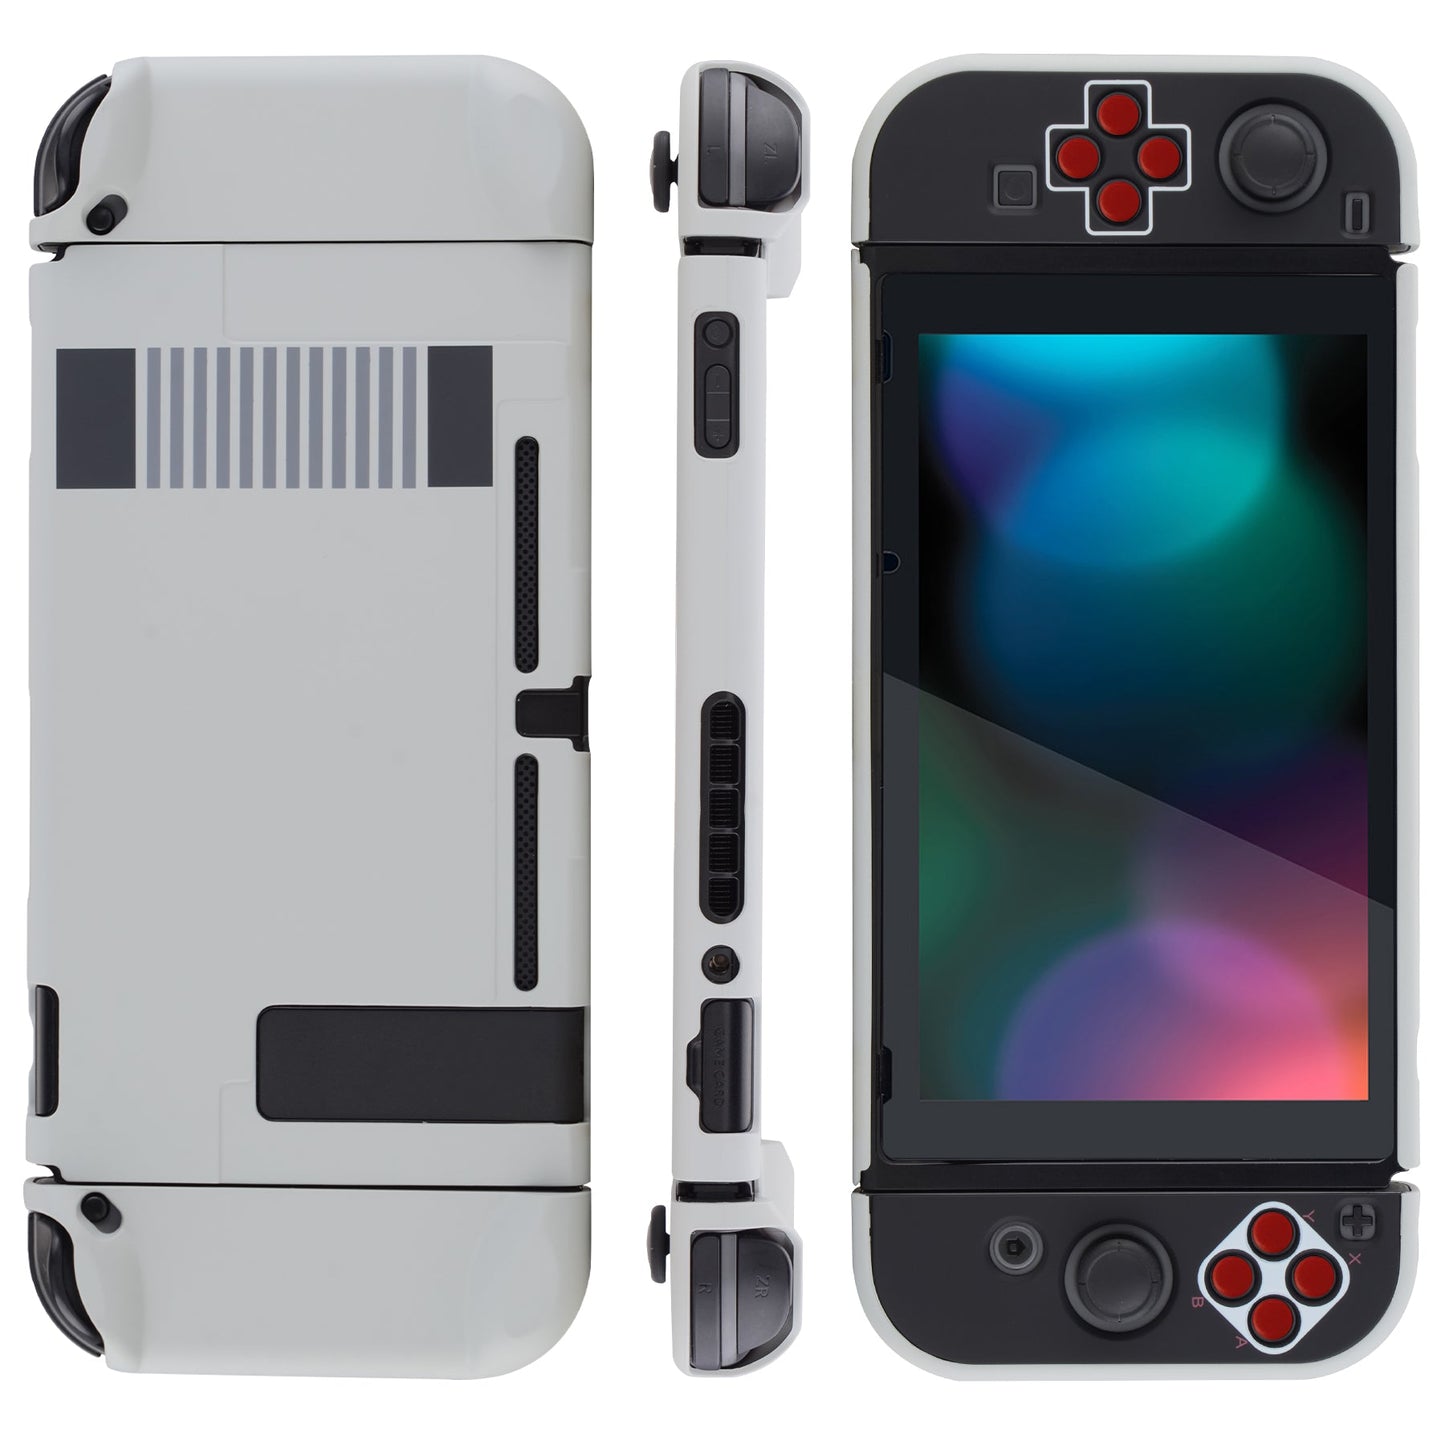 PlayVital Classics NES Style Back Cover for NS Switch Console, NS Joycon Handheld Controller Separable Protector Hard Shell, Dockable Protective Case with Red ABXY Direction Button Caps - NTT103 PlayVital